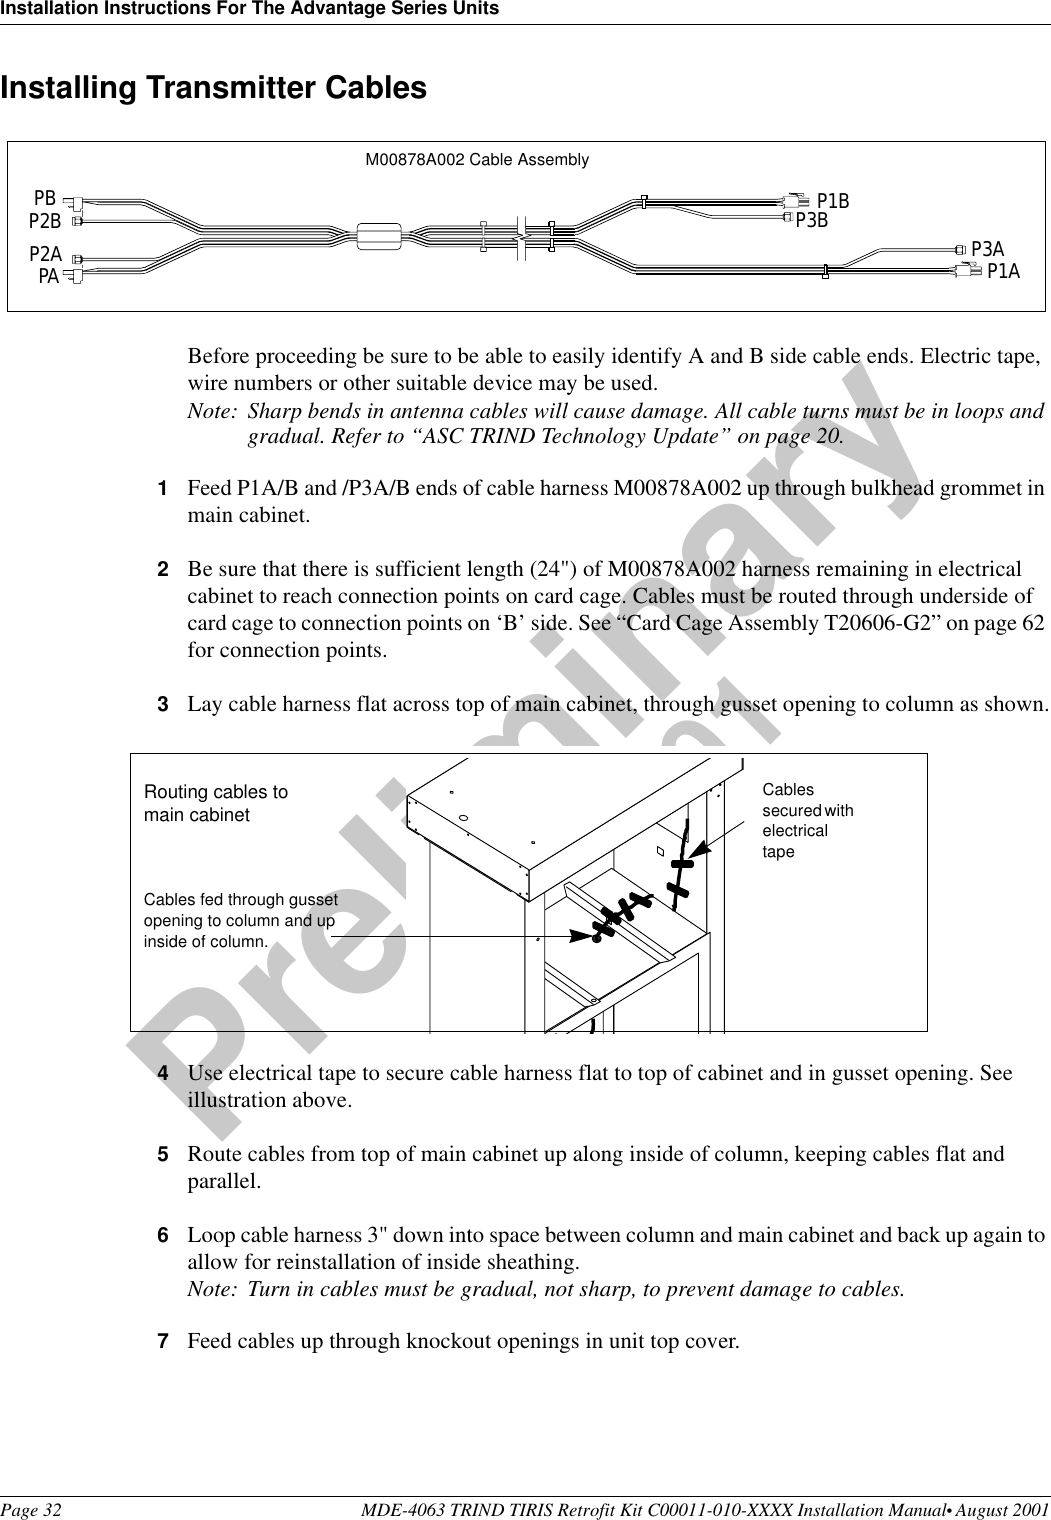 Installation Instructions For The Advantage Series UnitsPage 32 MDE-4063 TRIND TIRIS Retrofit Kit C00011-010-XXXX Installation Manual• August 2001Preliminary08-24-01Installing Transmitter CablesBefore proceeding be sure to be able to easily identify A and B side cable ends. Electric tape, wire numbers or other suitable device may be used.Note: Sharp bends in antenna cables will cause damage. All cable turns must be in loops and gradual. Refer to “ASC TRIND Technology Update” on page 20. 1Feed P1A/B and /P3A/B ends of cable harness M00878A002 up through bulkhead grommet in main cabinet.2Be sure that there is sufficient length (24&quot;) of M00878A002 harness remaining in electrical cabinet to reach connection points on card cage. Cables must be routed through underside of card cage to connection points on ‘B’ side. See “Card Cage Assembly T20606-G2” on page 62 for connection points.3Lay cable harness flat across top of main cabinet, through gusset opening to column as shown.4Use electrical tape to secure cable harness flat to top of cabinet and in gusset opening. See illustration above.5Route cables from top of main cabinet up along inside of column, keeping cables flat and parallel.6Loop cable harness 3&quot; down into space between column and main cabinet and back up again to allow for reinstallation of inside sheathing.Note: Turn in cables must be gradual, not sharp, to prevent damage to cables.7Feed cables up through knockout openings in unit top cover.PBP2BP2APAP1BP3B P3AP1AM00878A002 Cable AssemblyCables fed through gusset opening to column and up inside of column.Routing cables to main cabinetCables secured with electrical tape